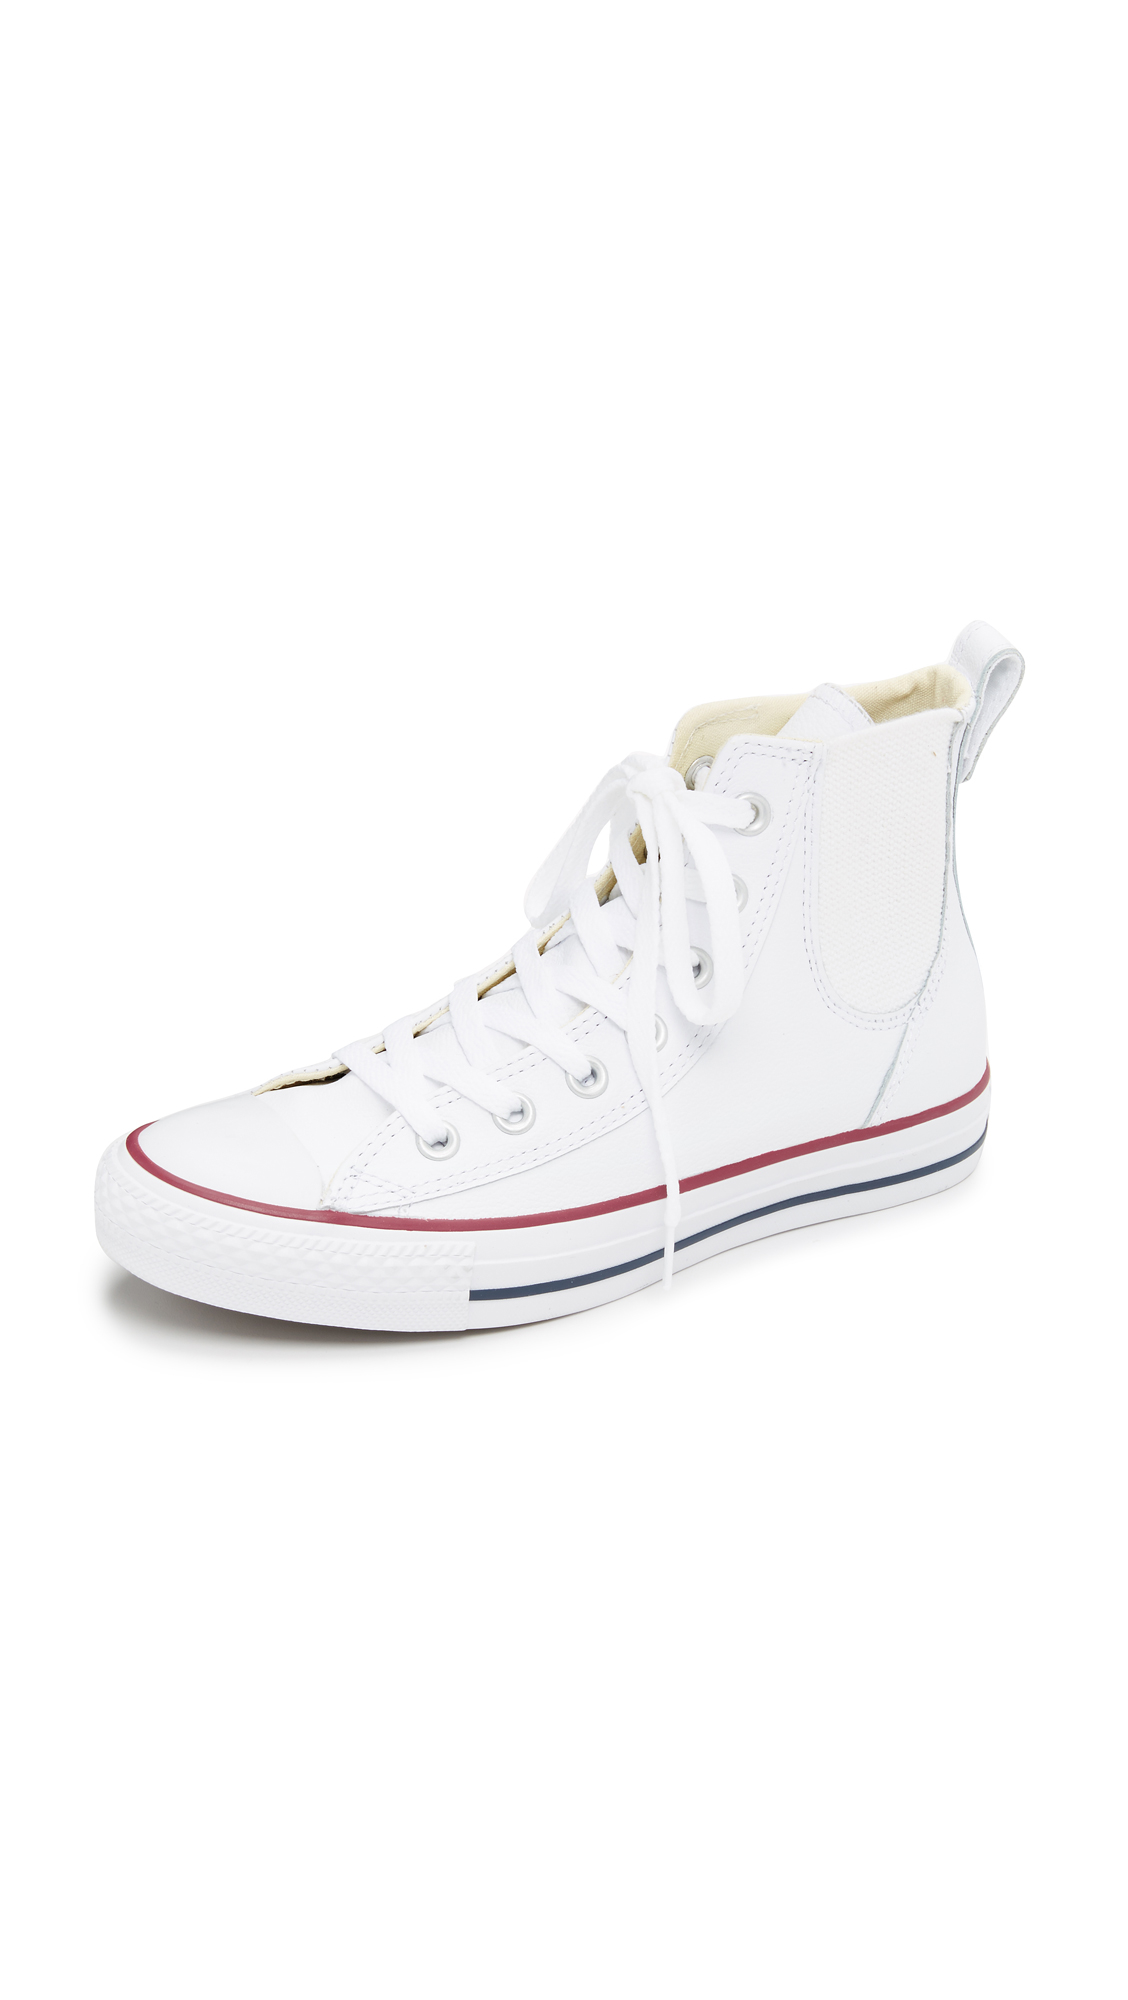 Converse Chuck Taylor All Star Chelsea Sneakers - Cream/white in Natural |  Lyst